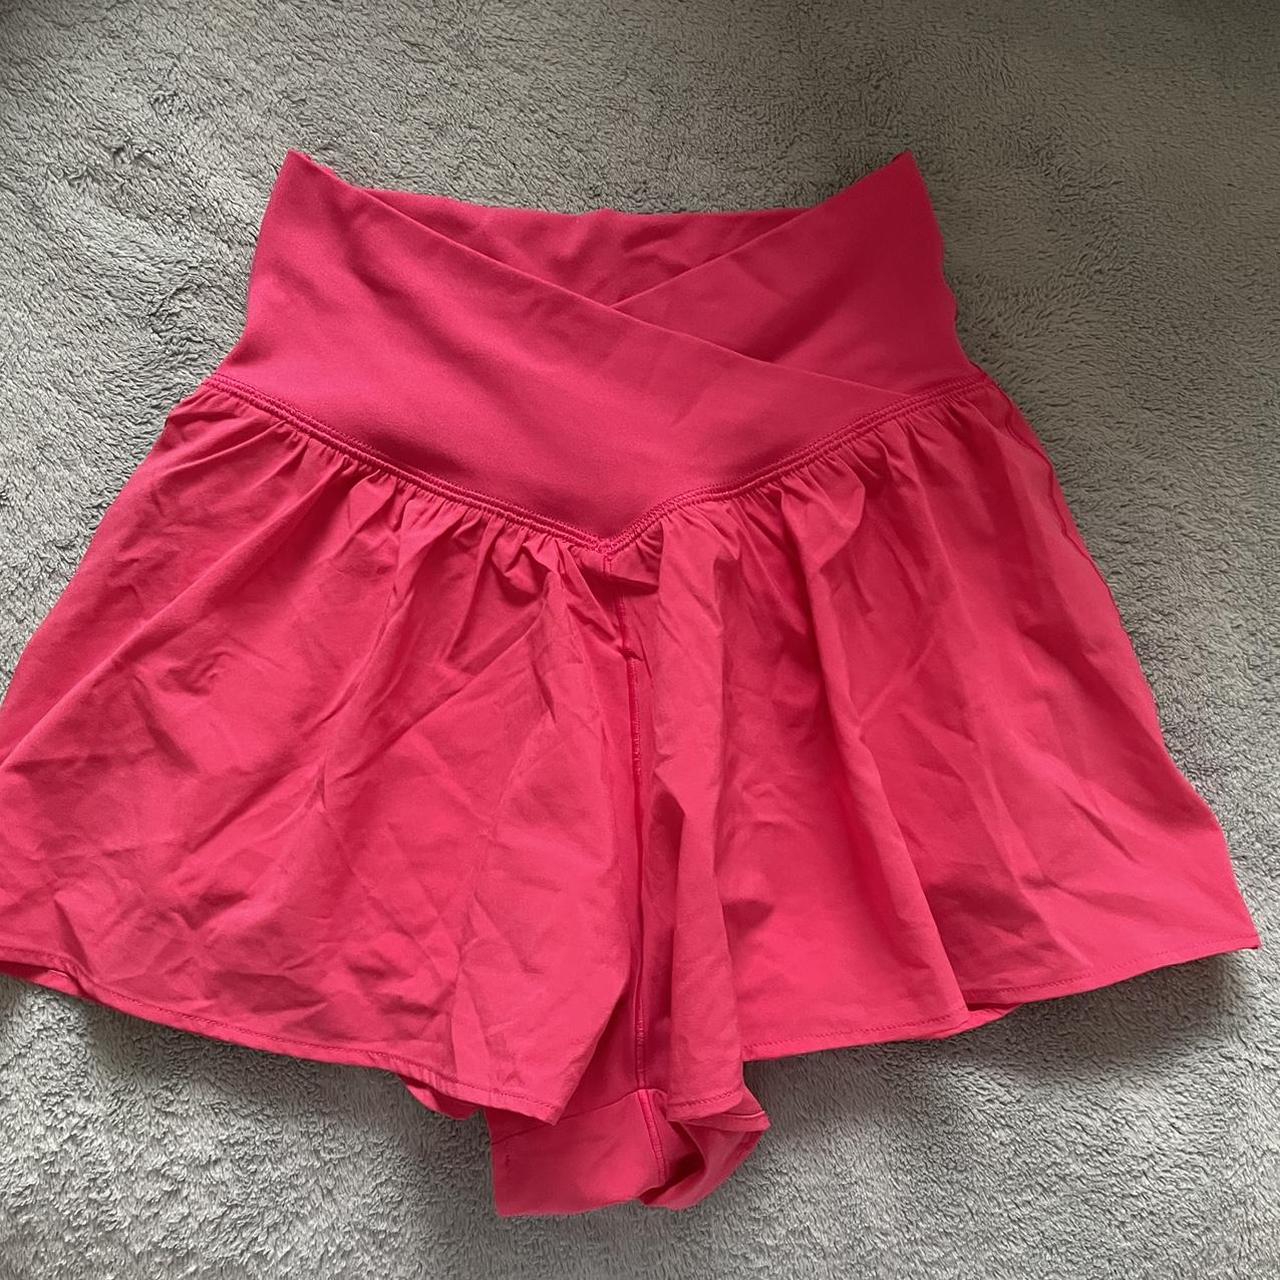 Aerie Real Me Crossover Flowy Short in coral🩷 size... - Depop